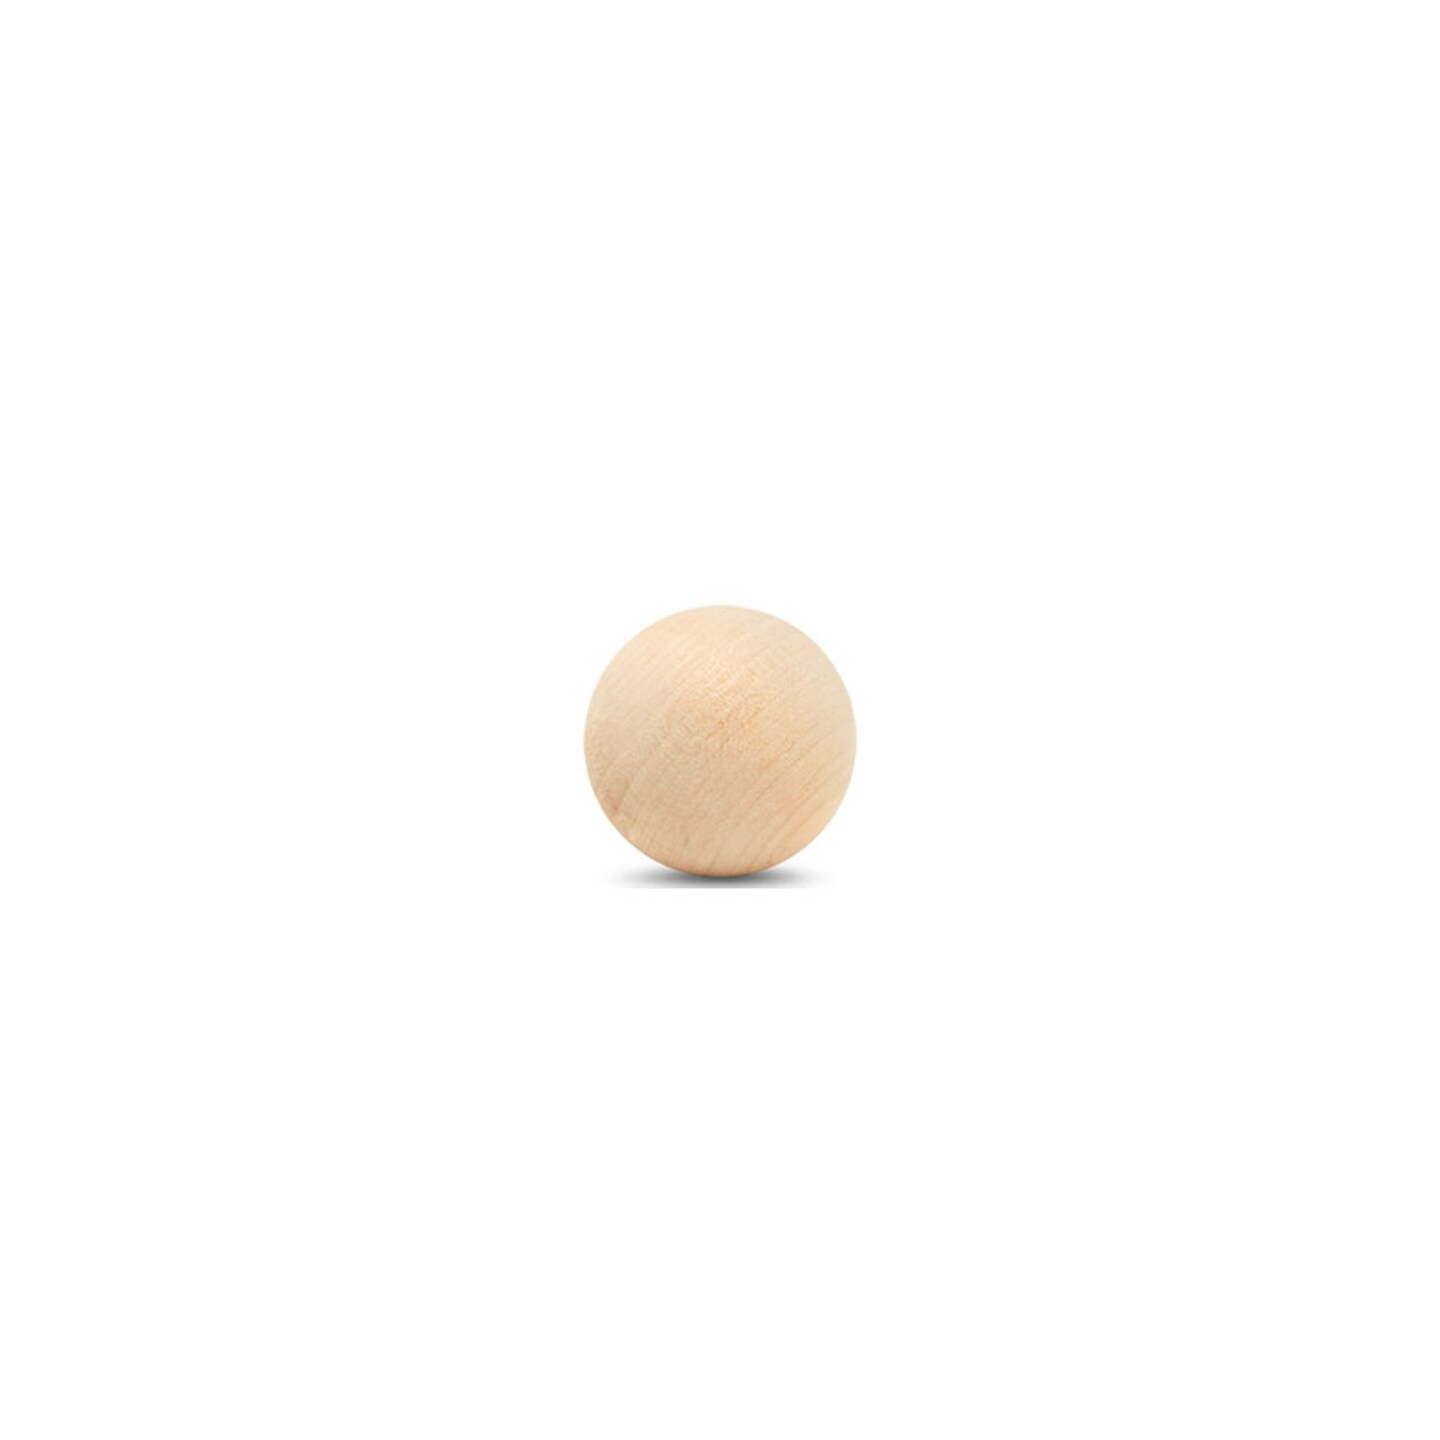 1-3/4” Large Wooden Ball for Crafts